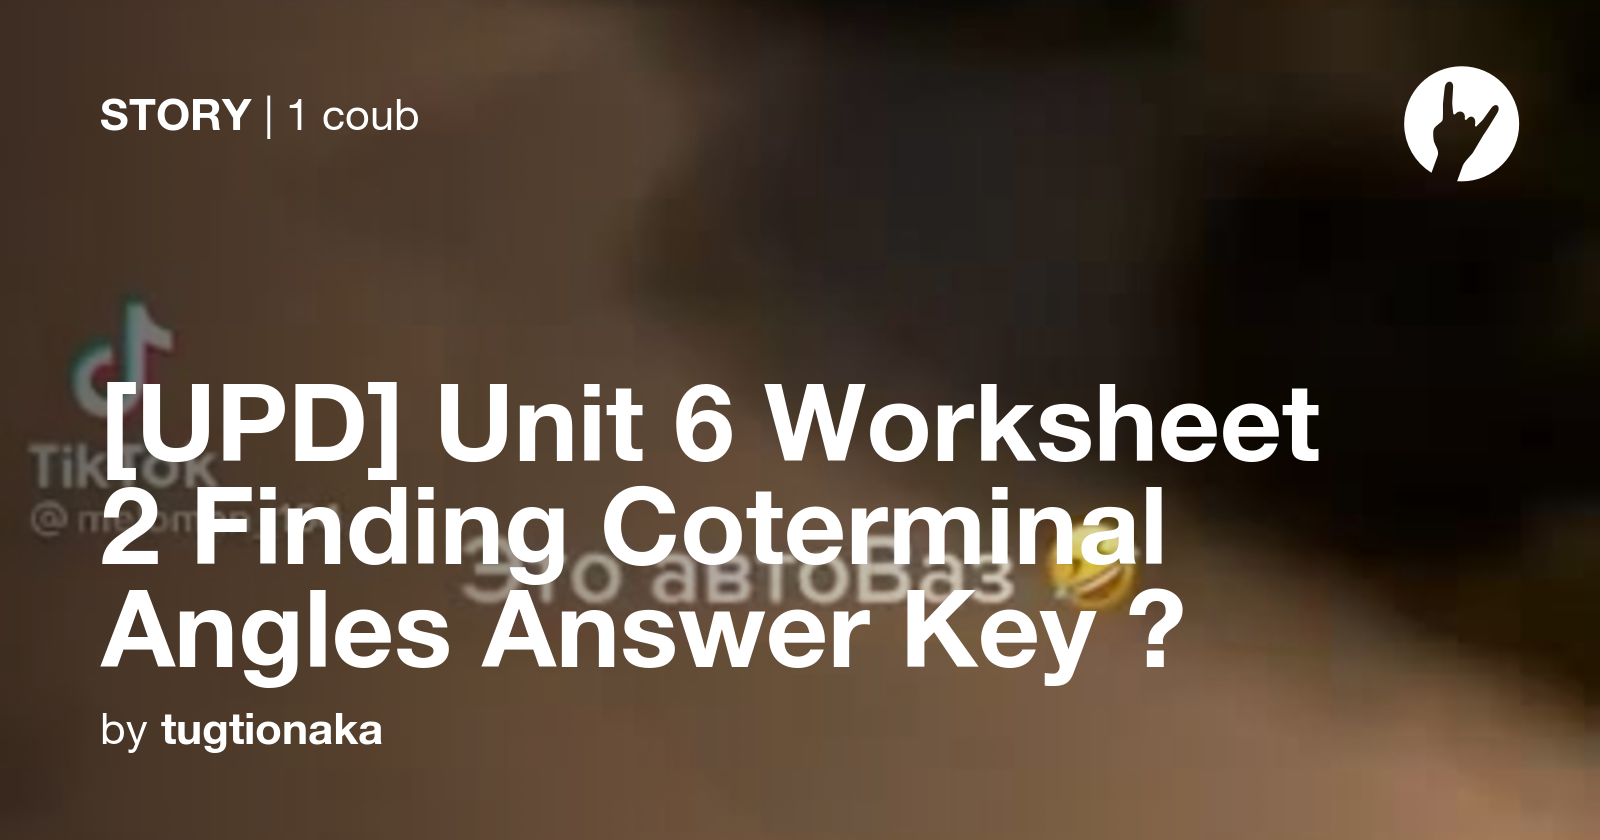 UPD Unit 6 Worksheet 2 Finding Coterminal Angles Answer Key Coub